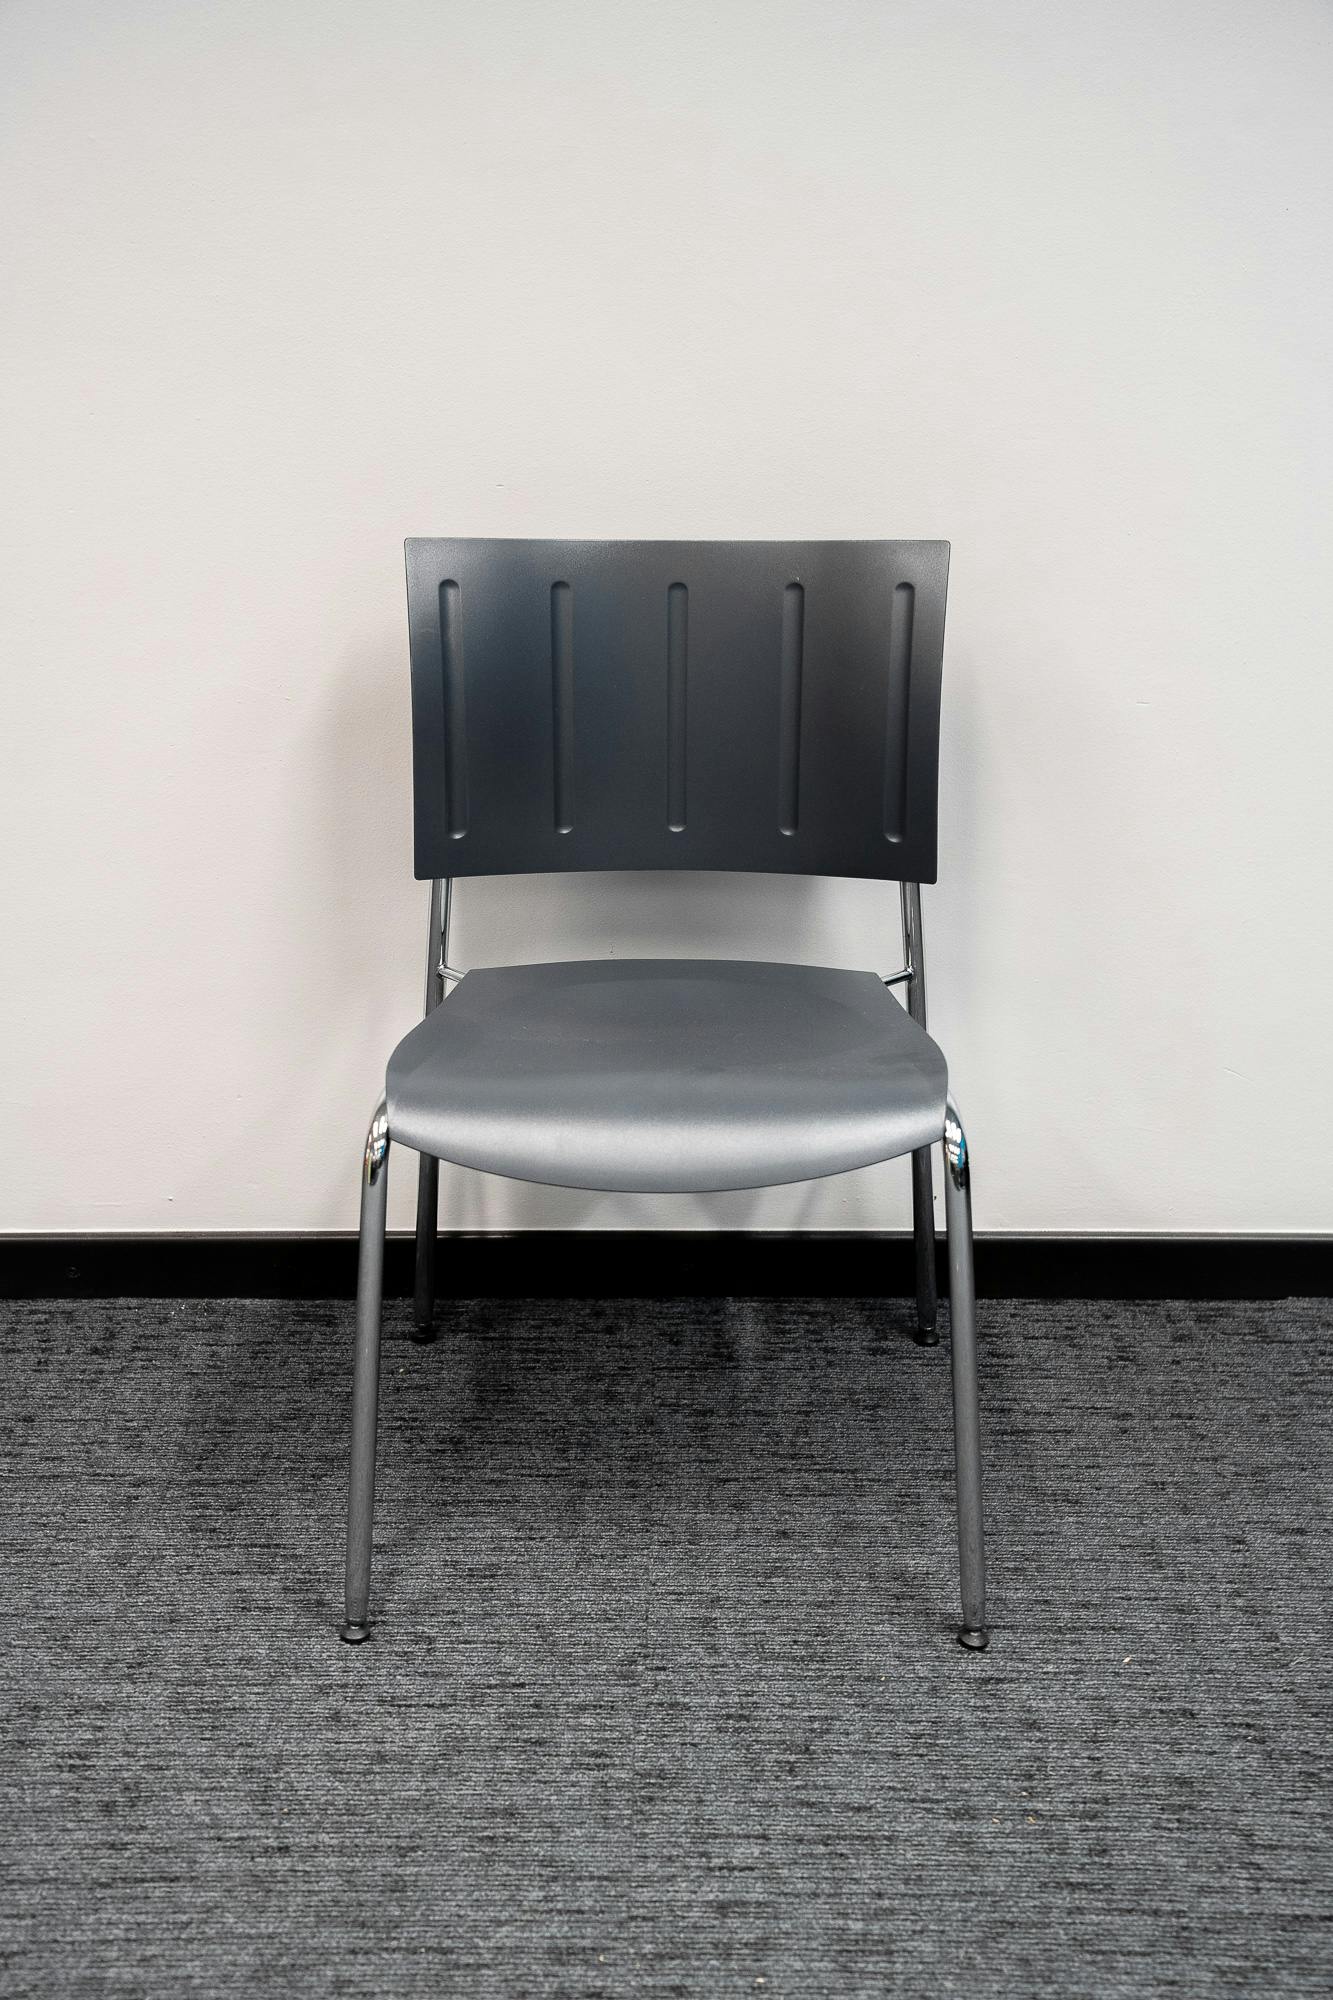 Tecno grey chair - Second hand quality "Chairs" - Relieve Furniture